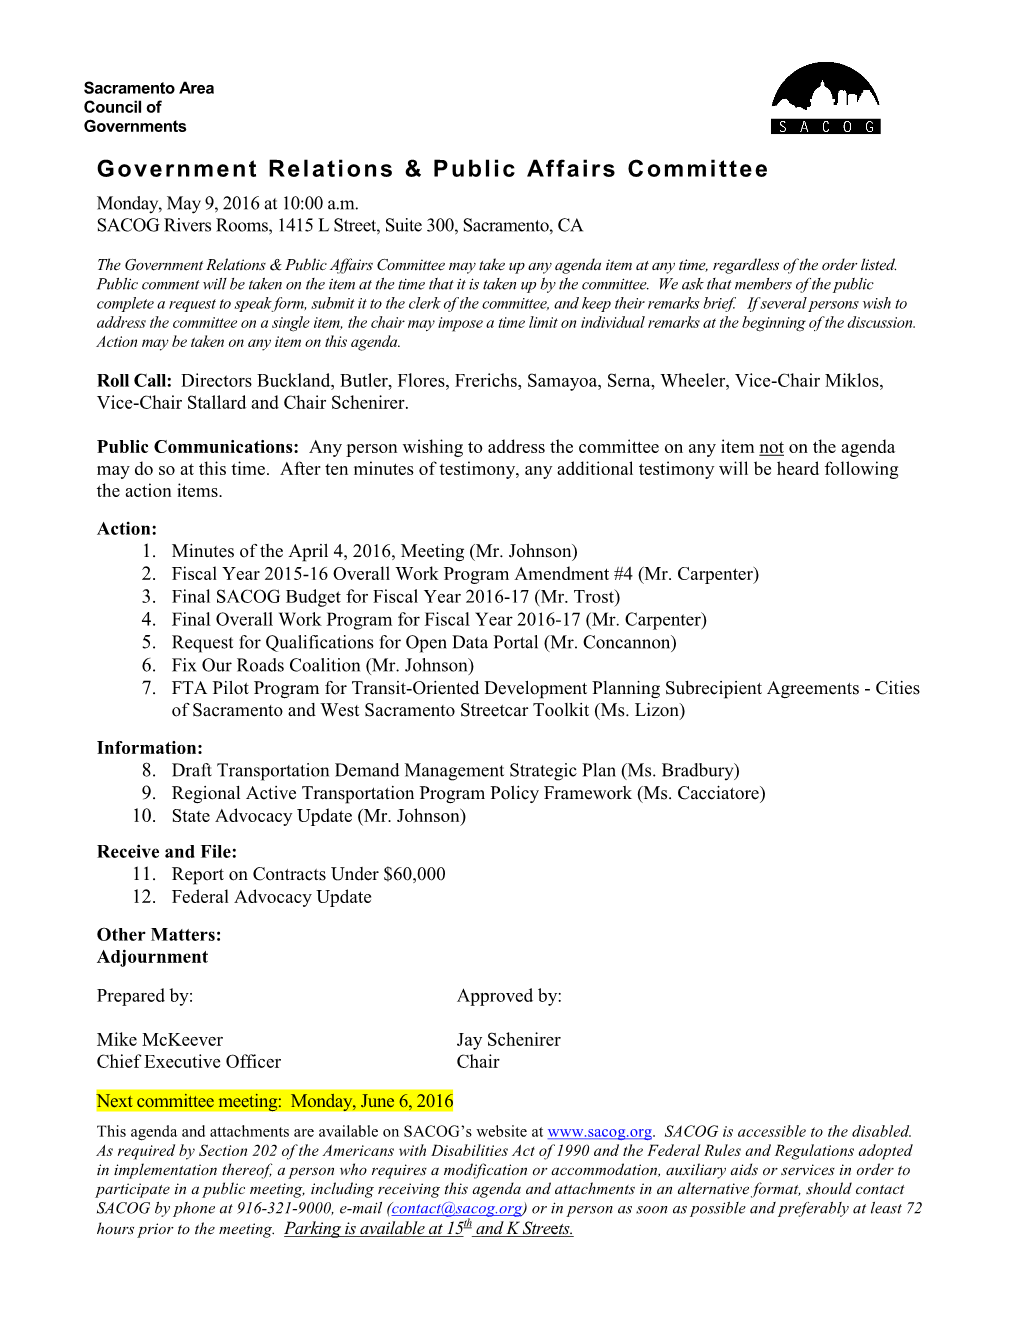 Government Relations & Public Affairs Committee